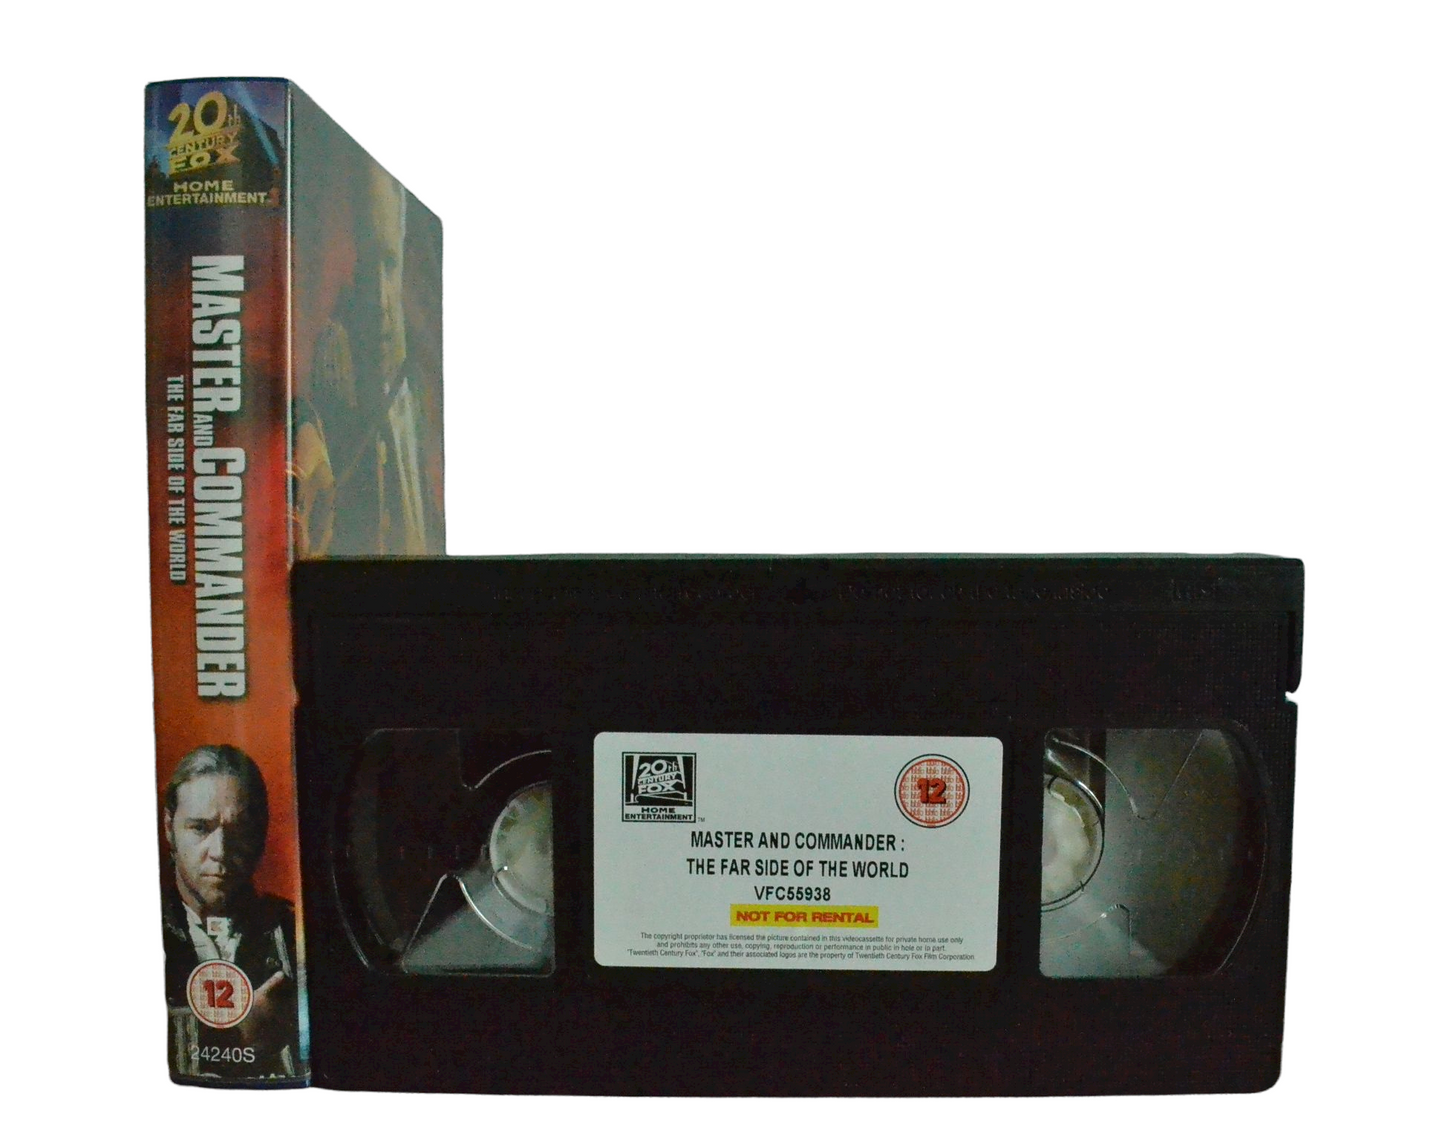 Master And Commander: The Far Side Of The World - Russell Crowe - 20th Century Fox Home Enterainment - Vintage - Pal VHS-